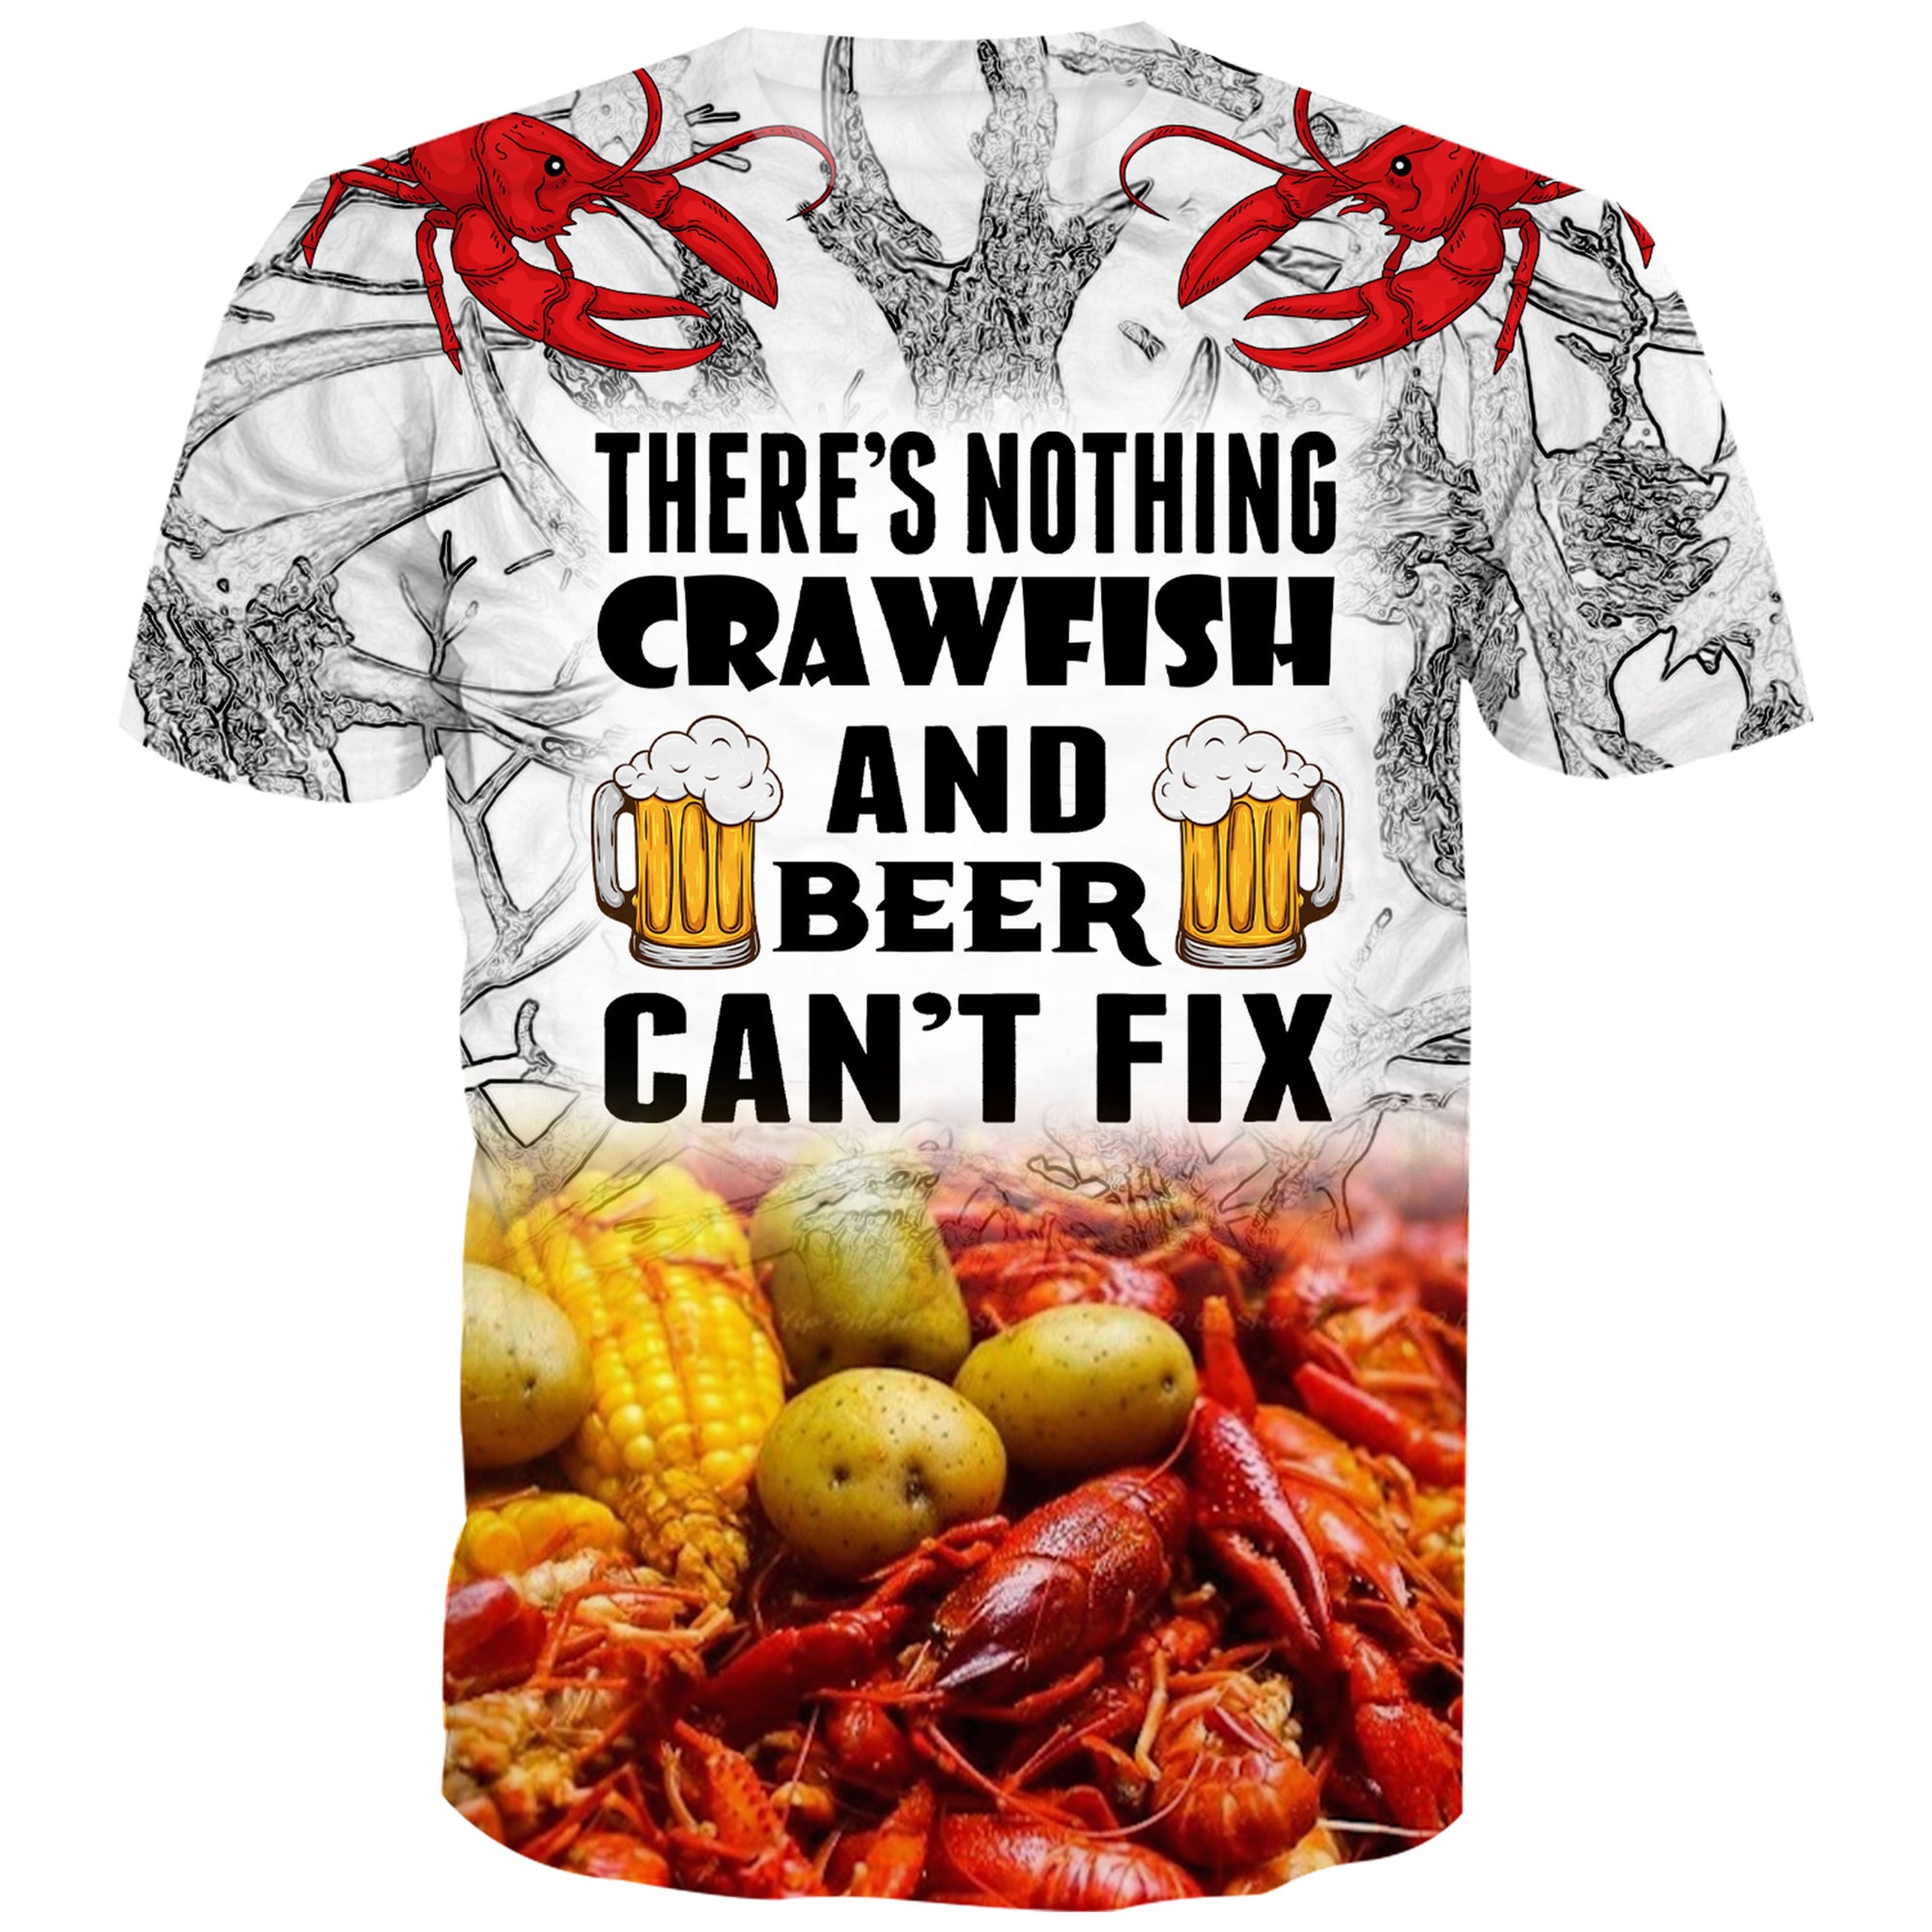 There's nothing crawfish and beer can't fix - T-Shirt